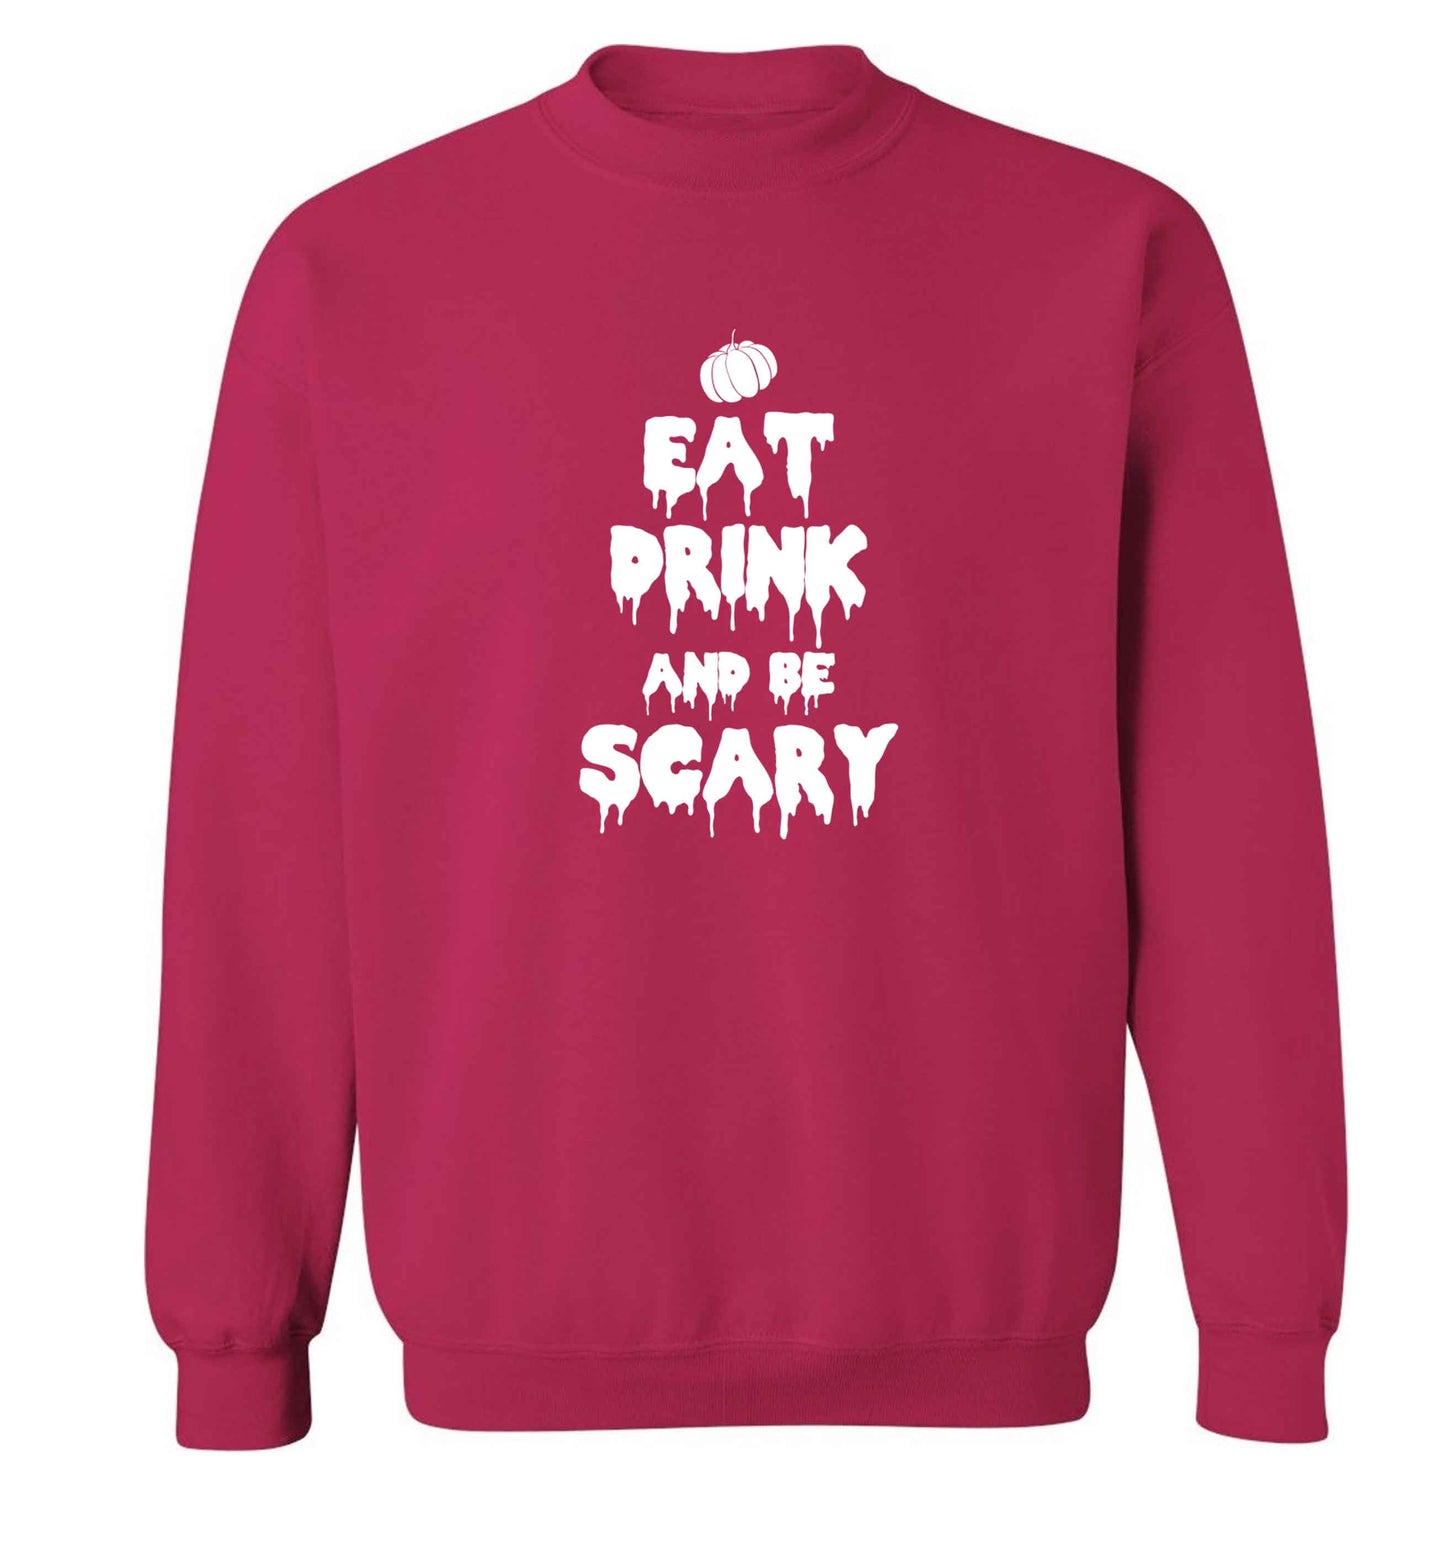 Eat drink and be scary adult's unisex pink sweater 2XL